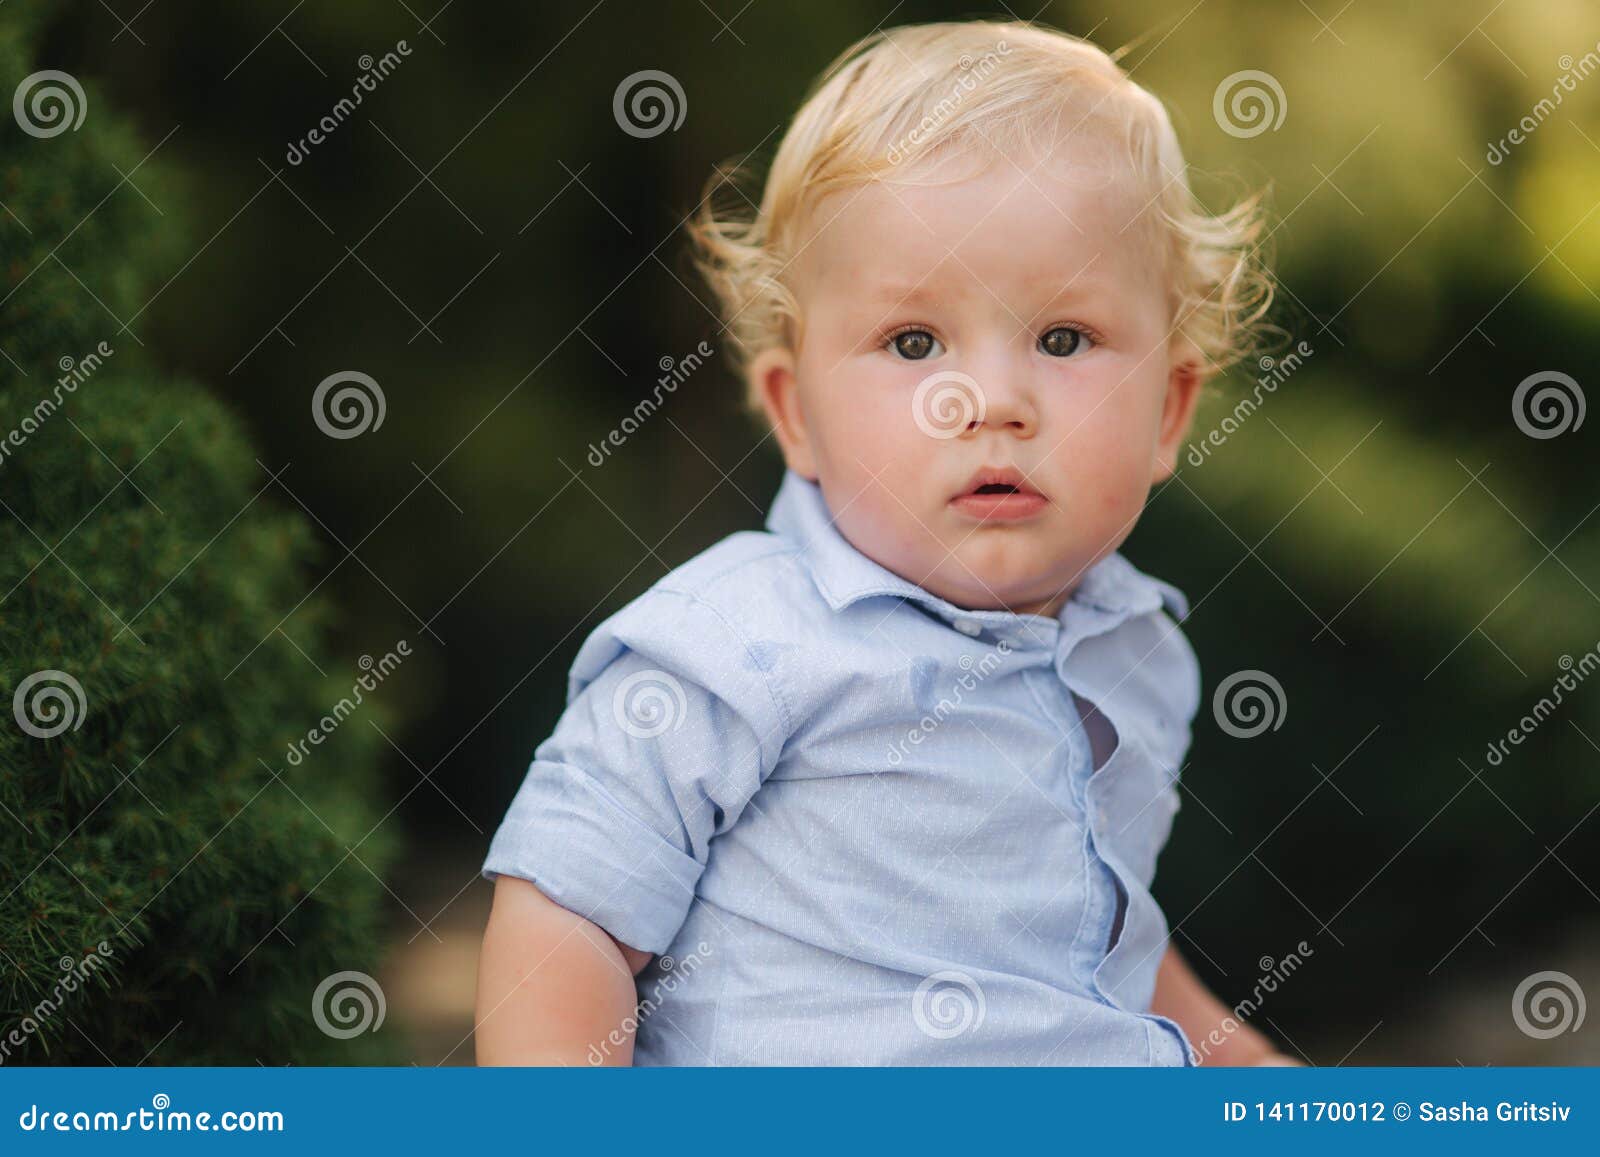 Happy Little Boy Sit Outside In Summer Time Boy With Curly Blond